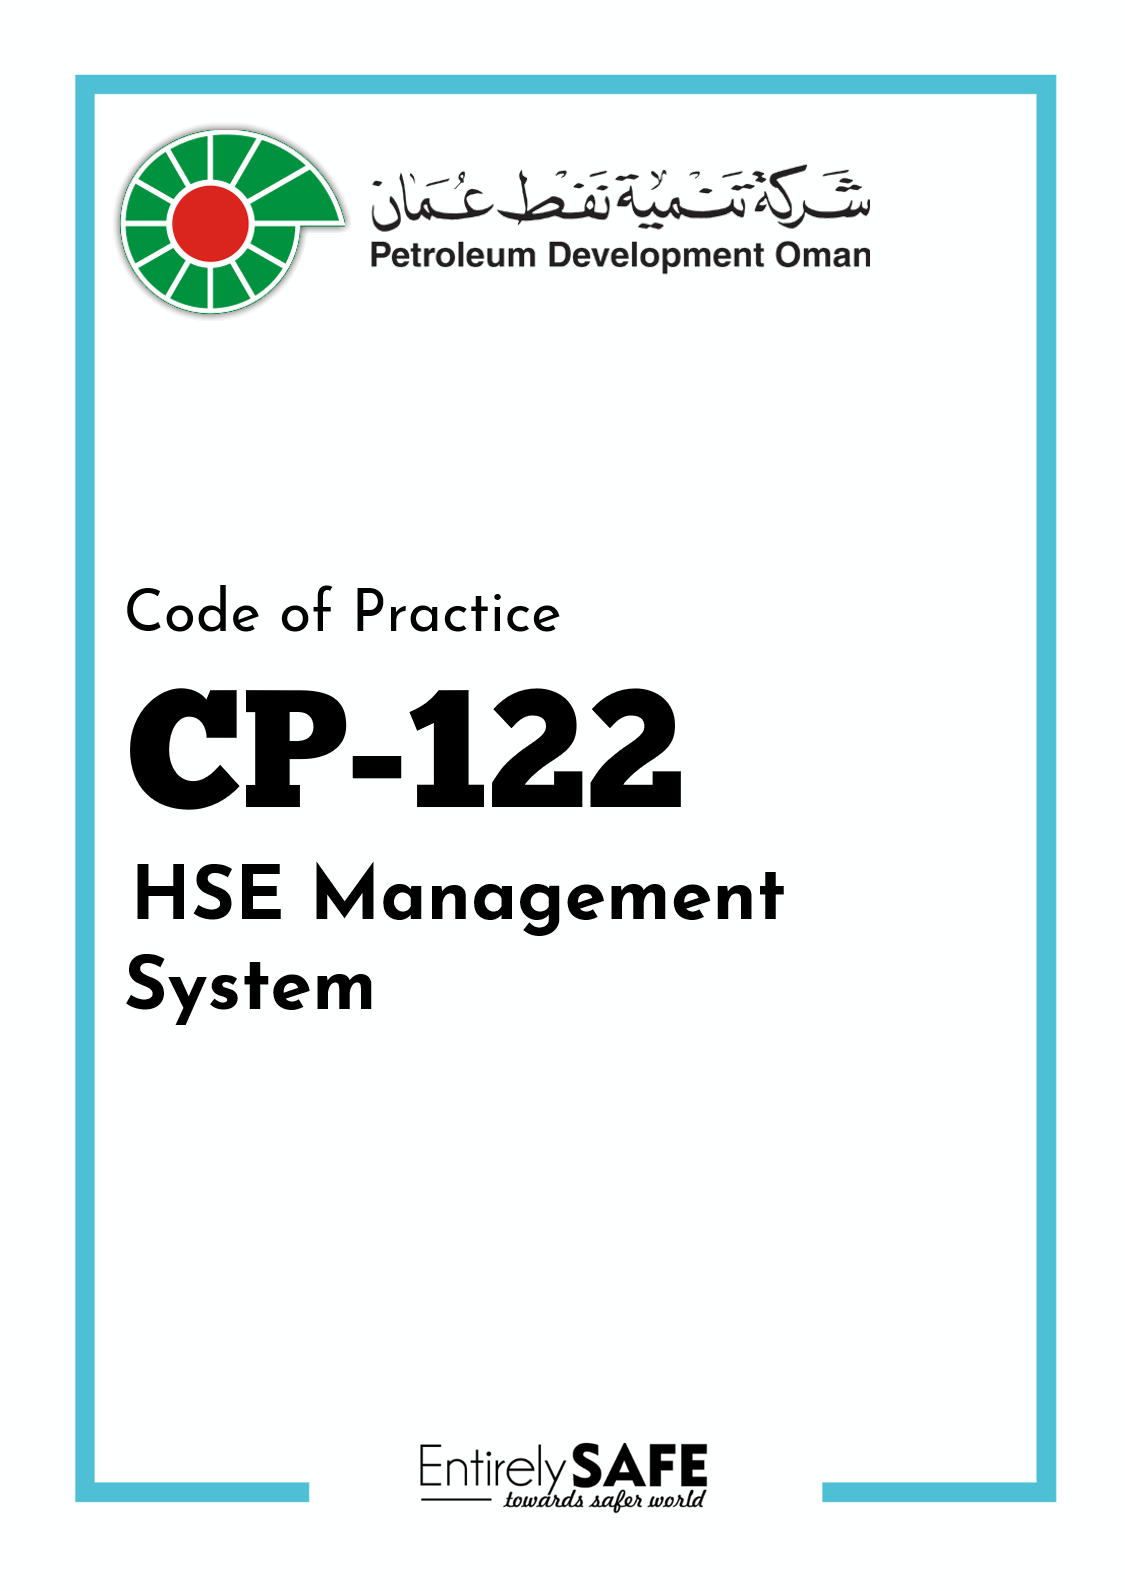 CP-122-Health-Safety-and-Environment-Management-System-CoP-PDO